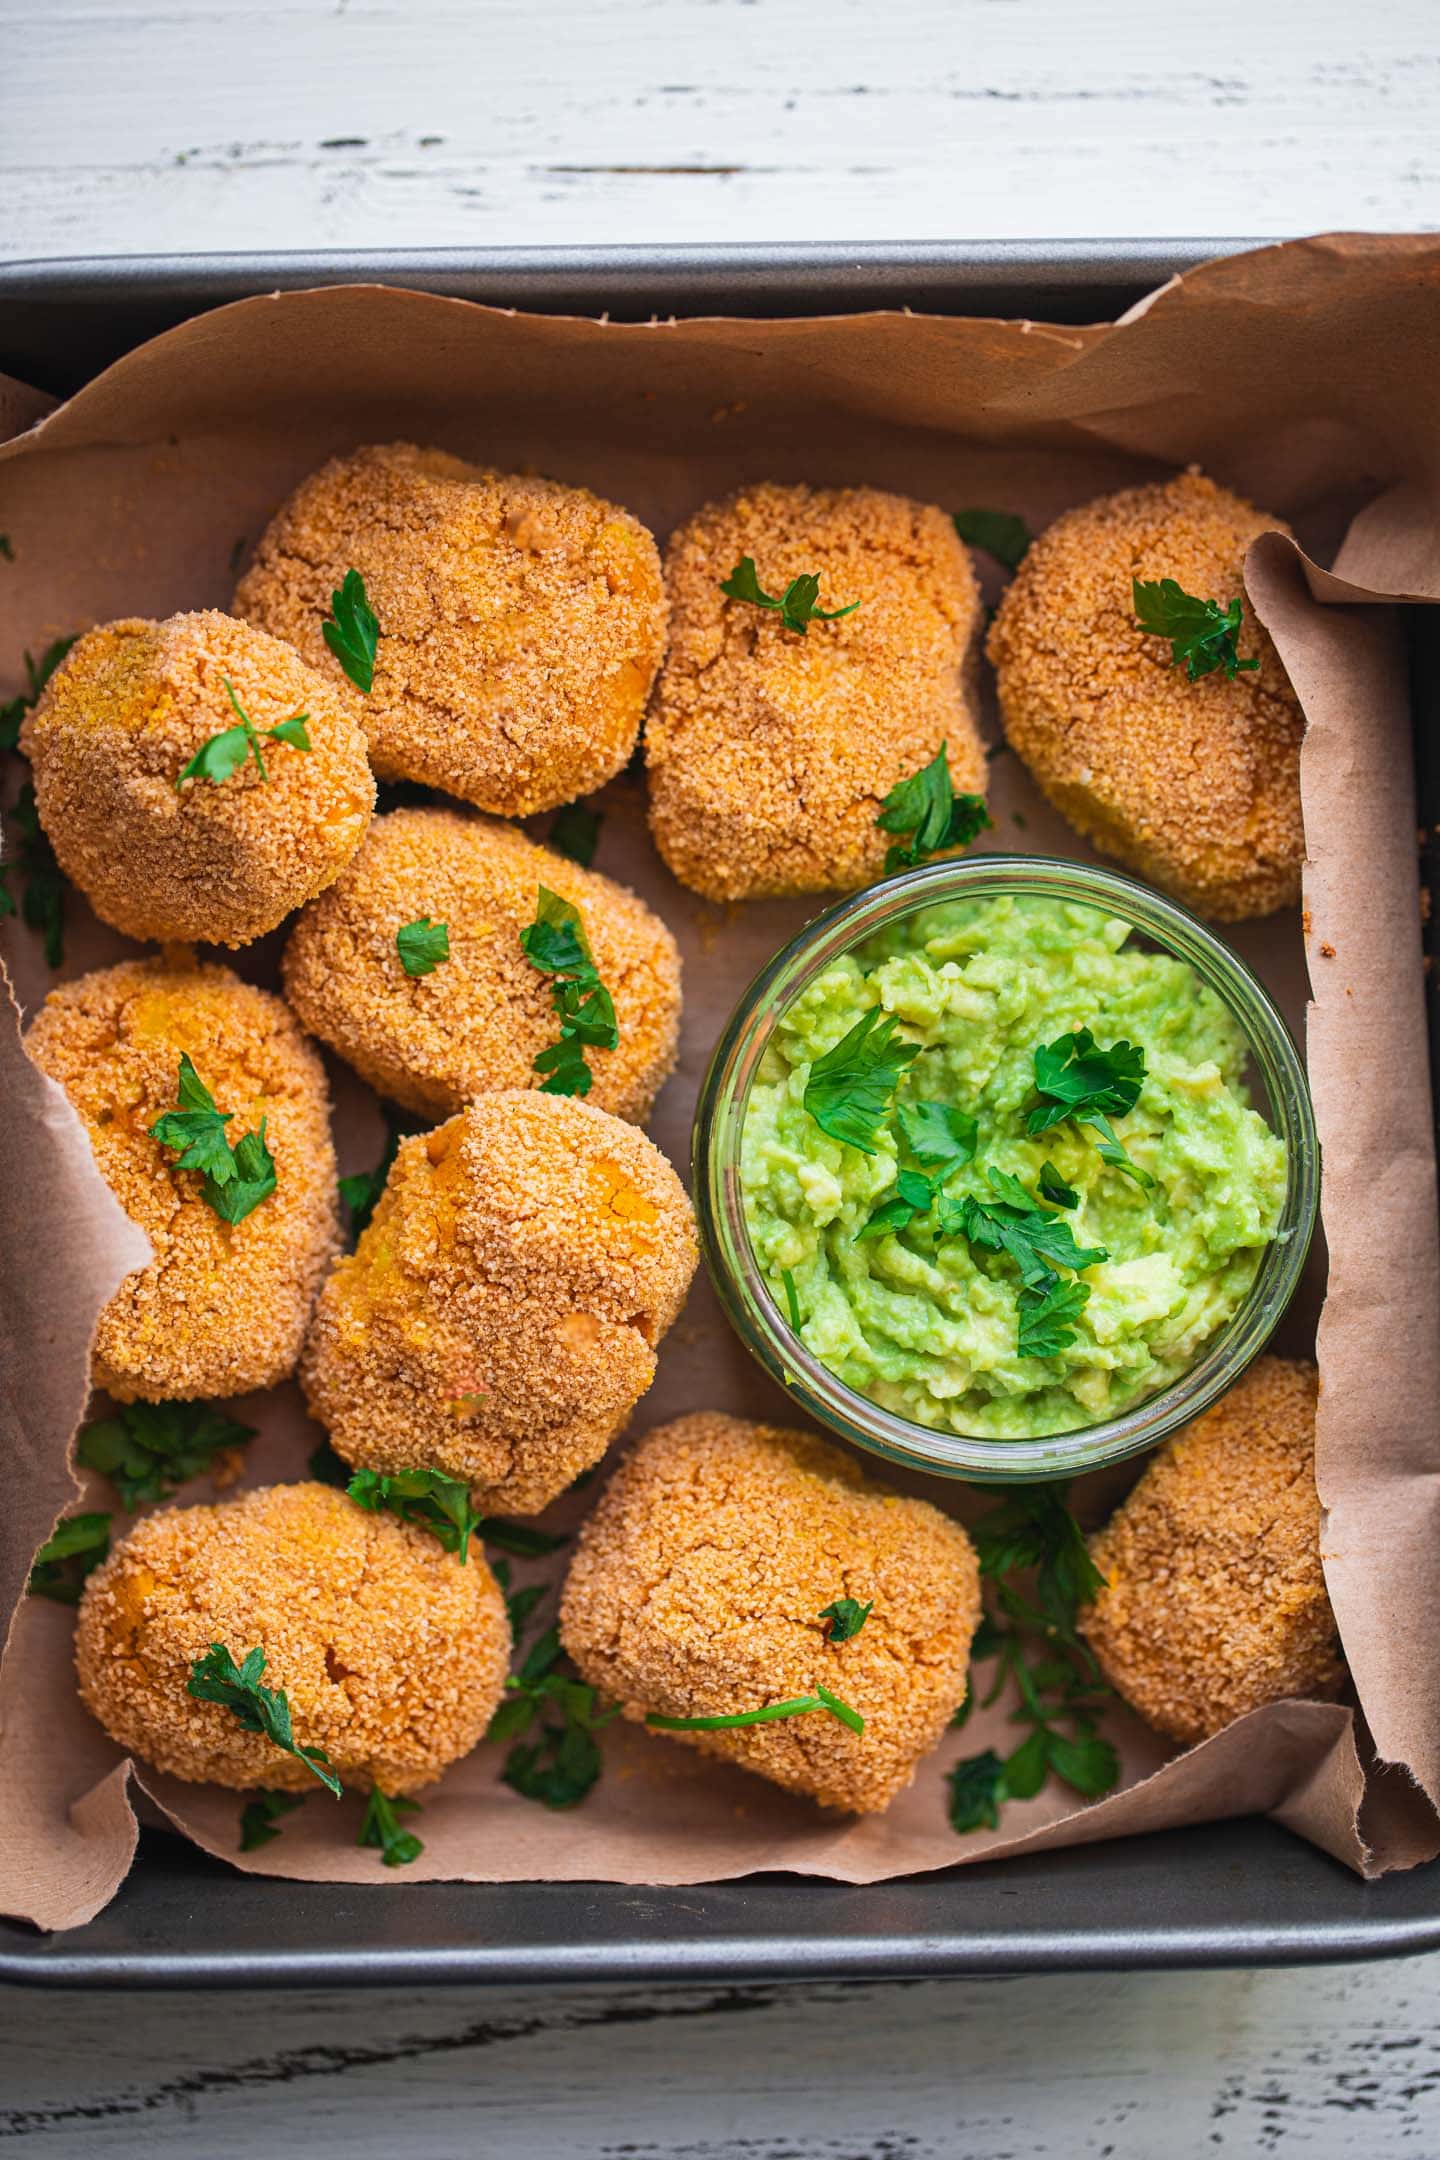 Vegan nuggets made from chickpeas